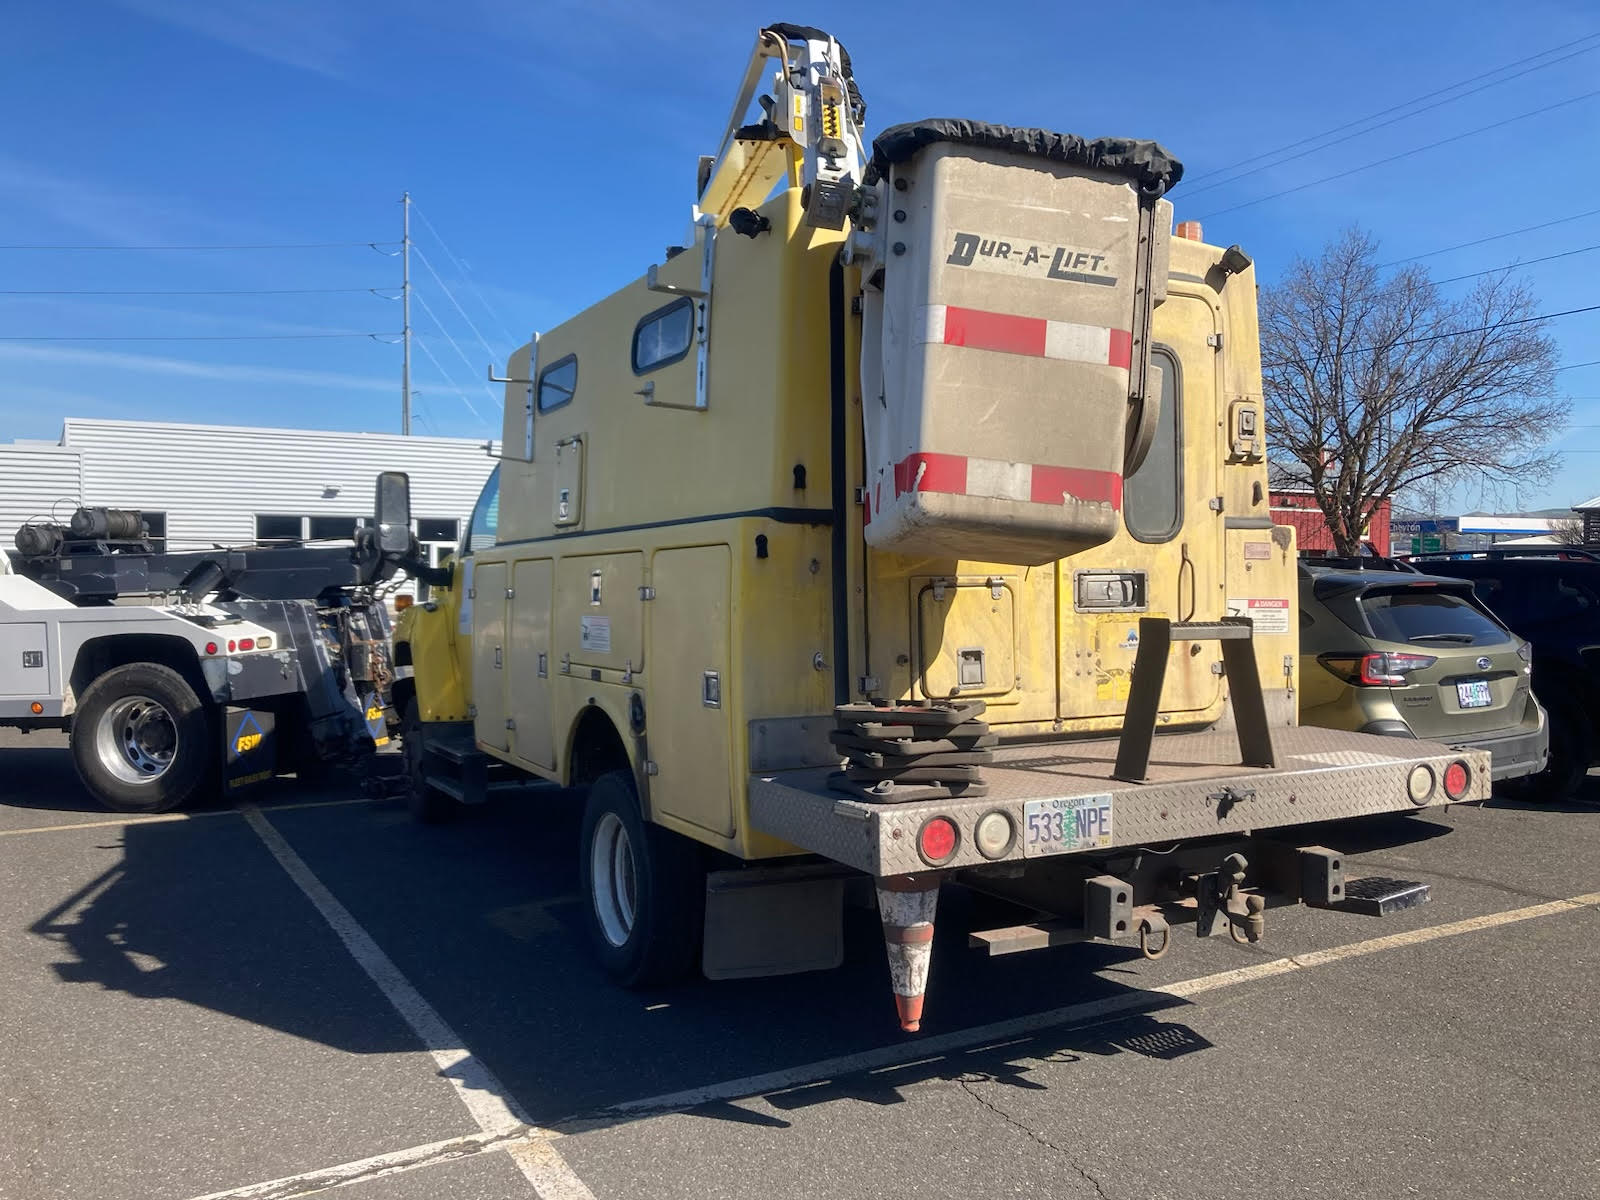 Babb's Towing - Portland, OR 97233 - (503)933-0809 | ShowMeLocal.com